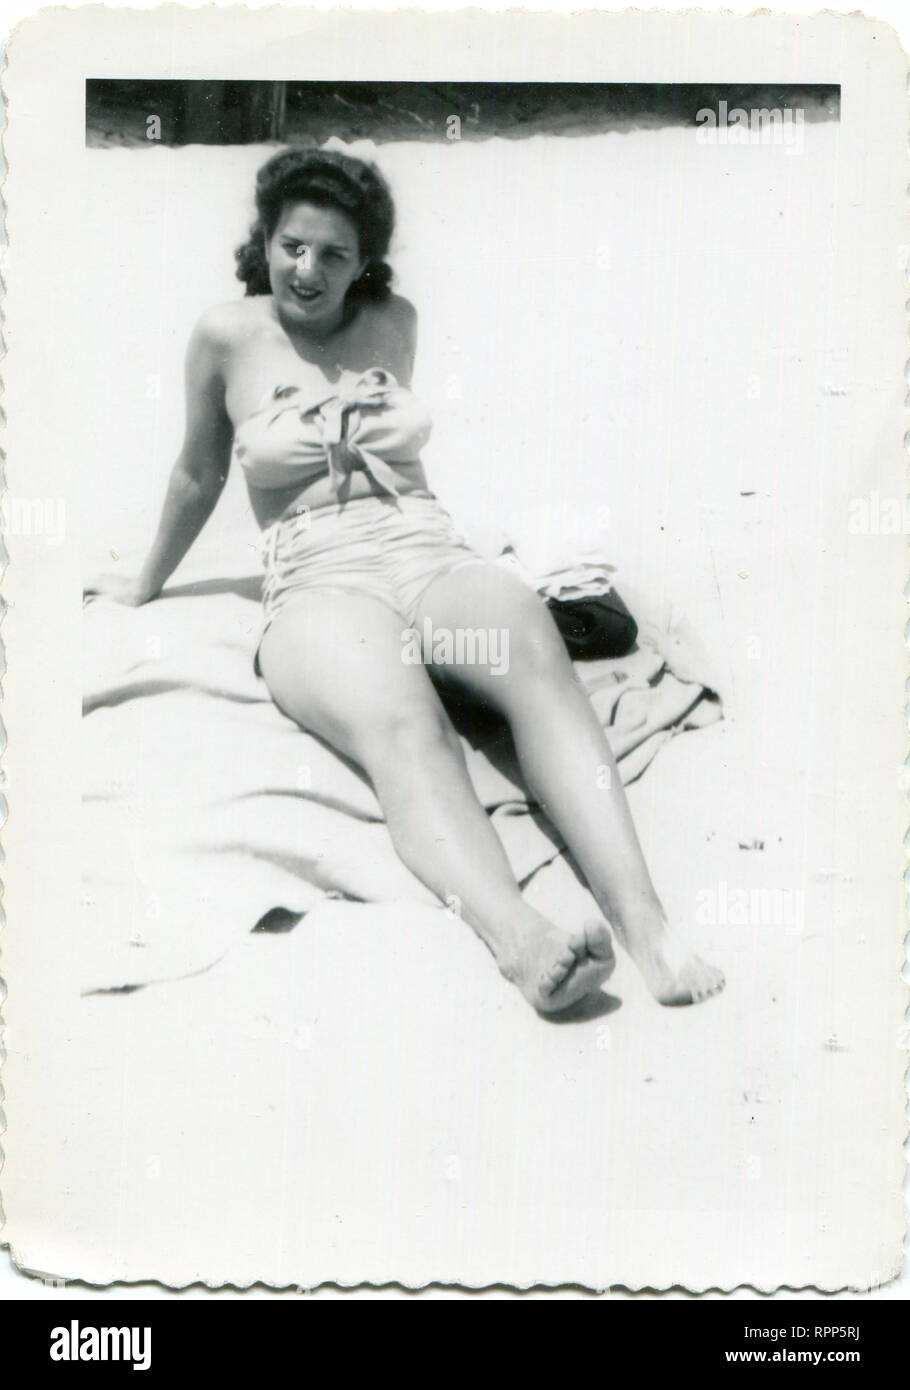 America, United States, 1940s. A young woman in a beautiful bathing suit sunbathes on the beach Stock Photo